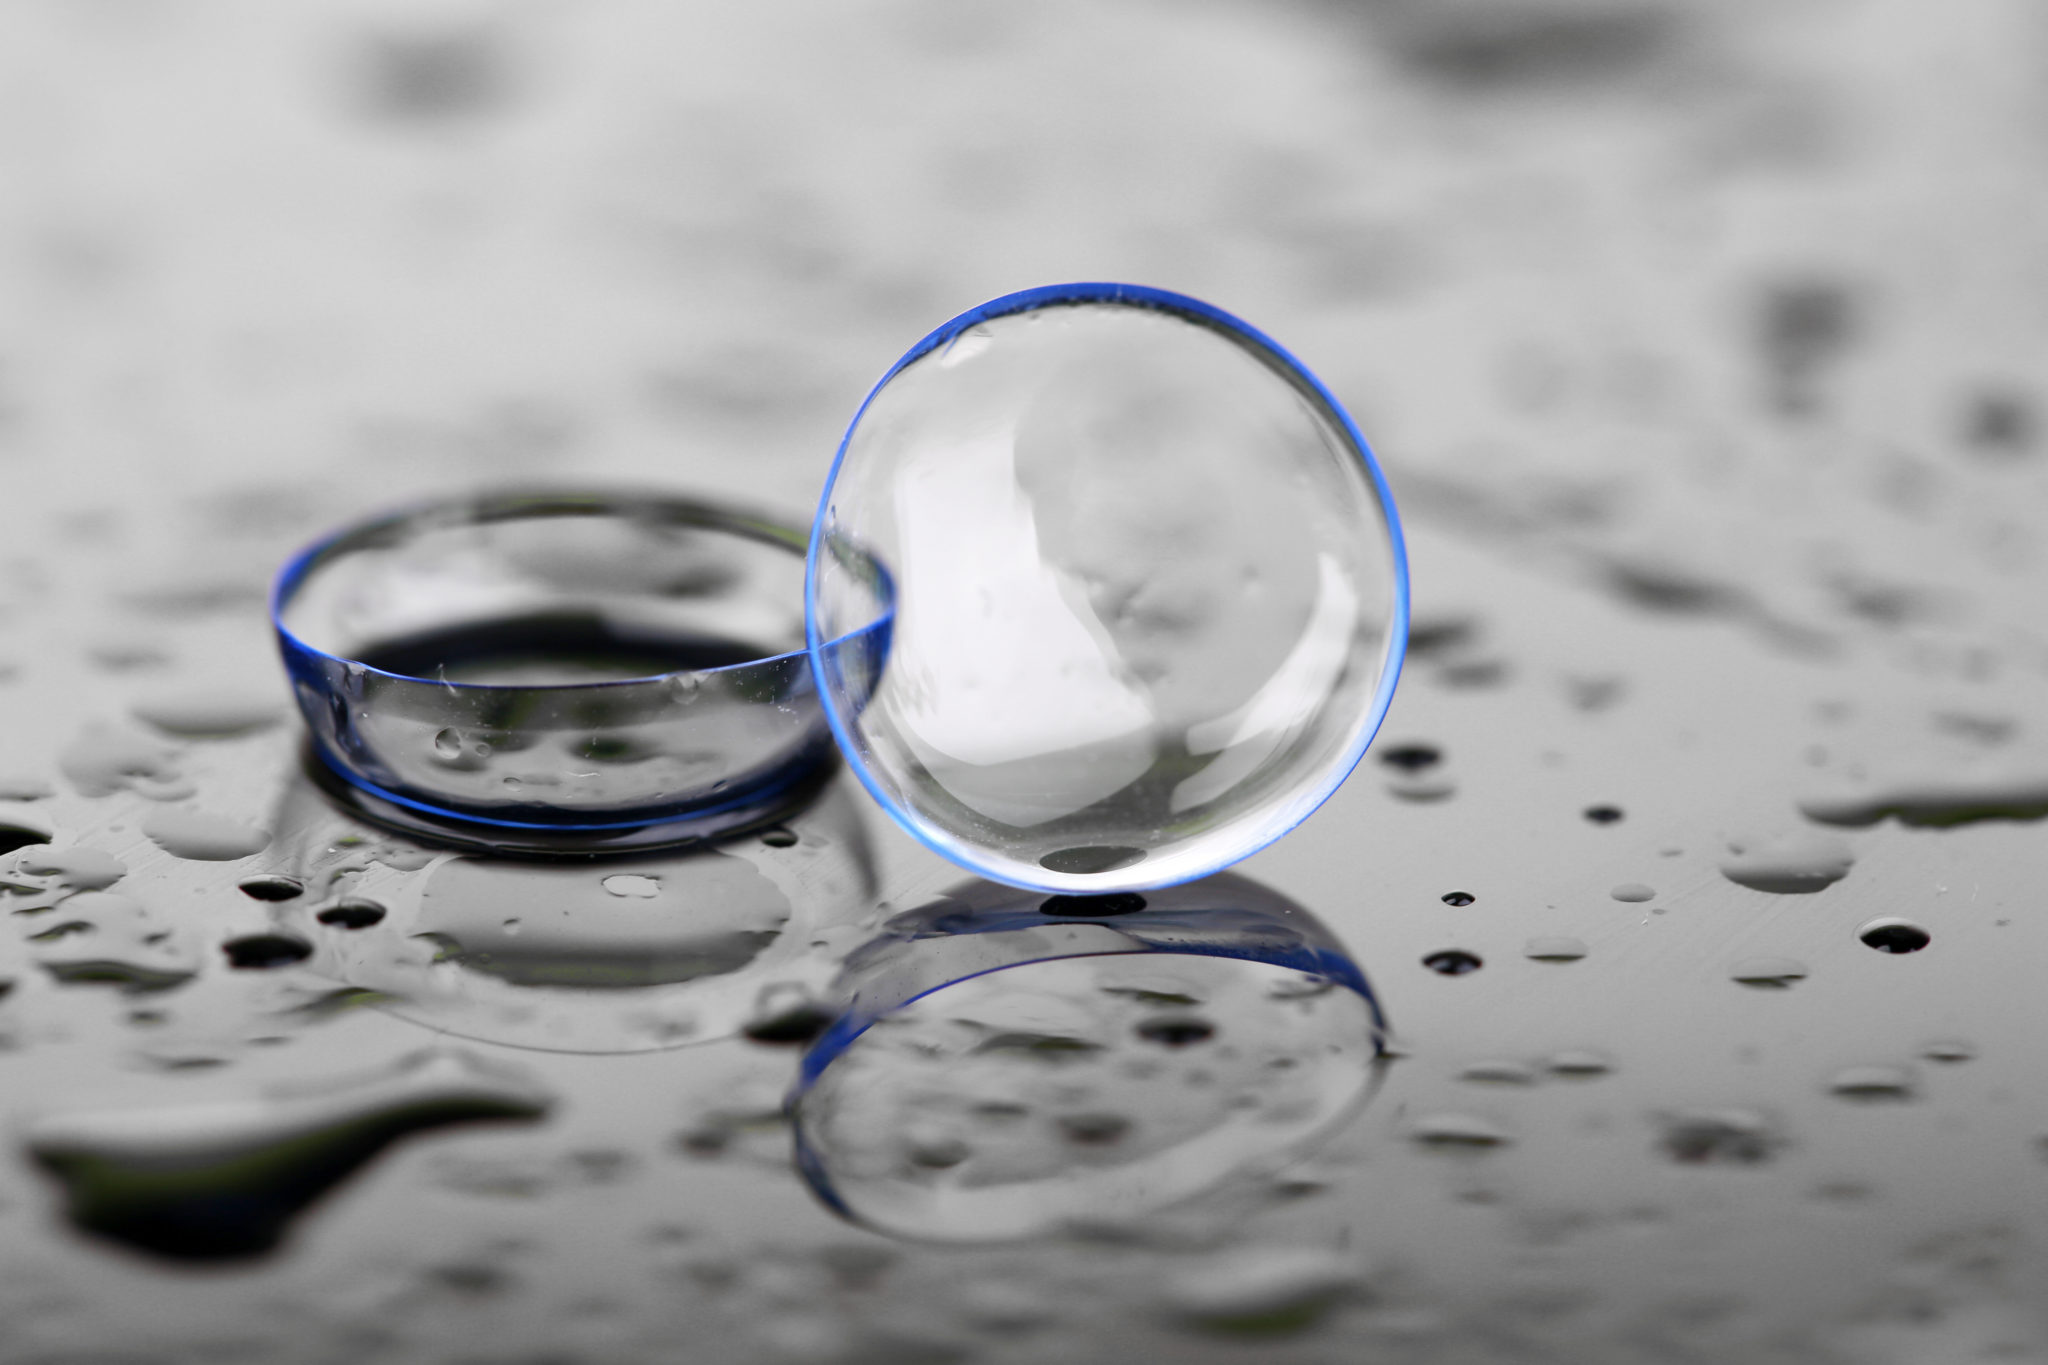 Contact lenses with water drops on bright background after they have been cleaned